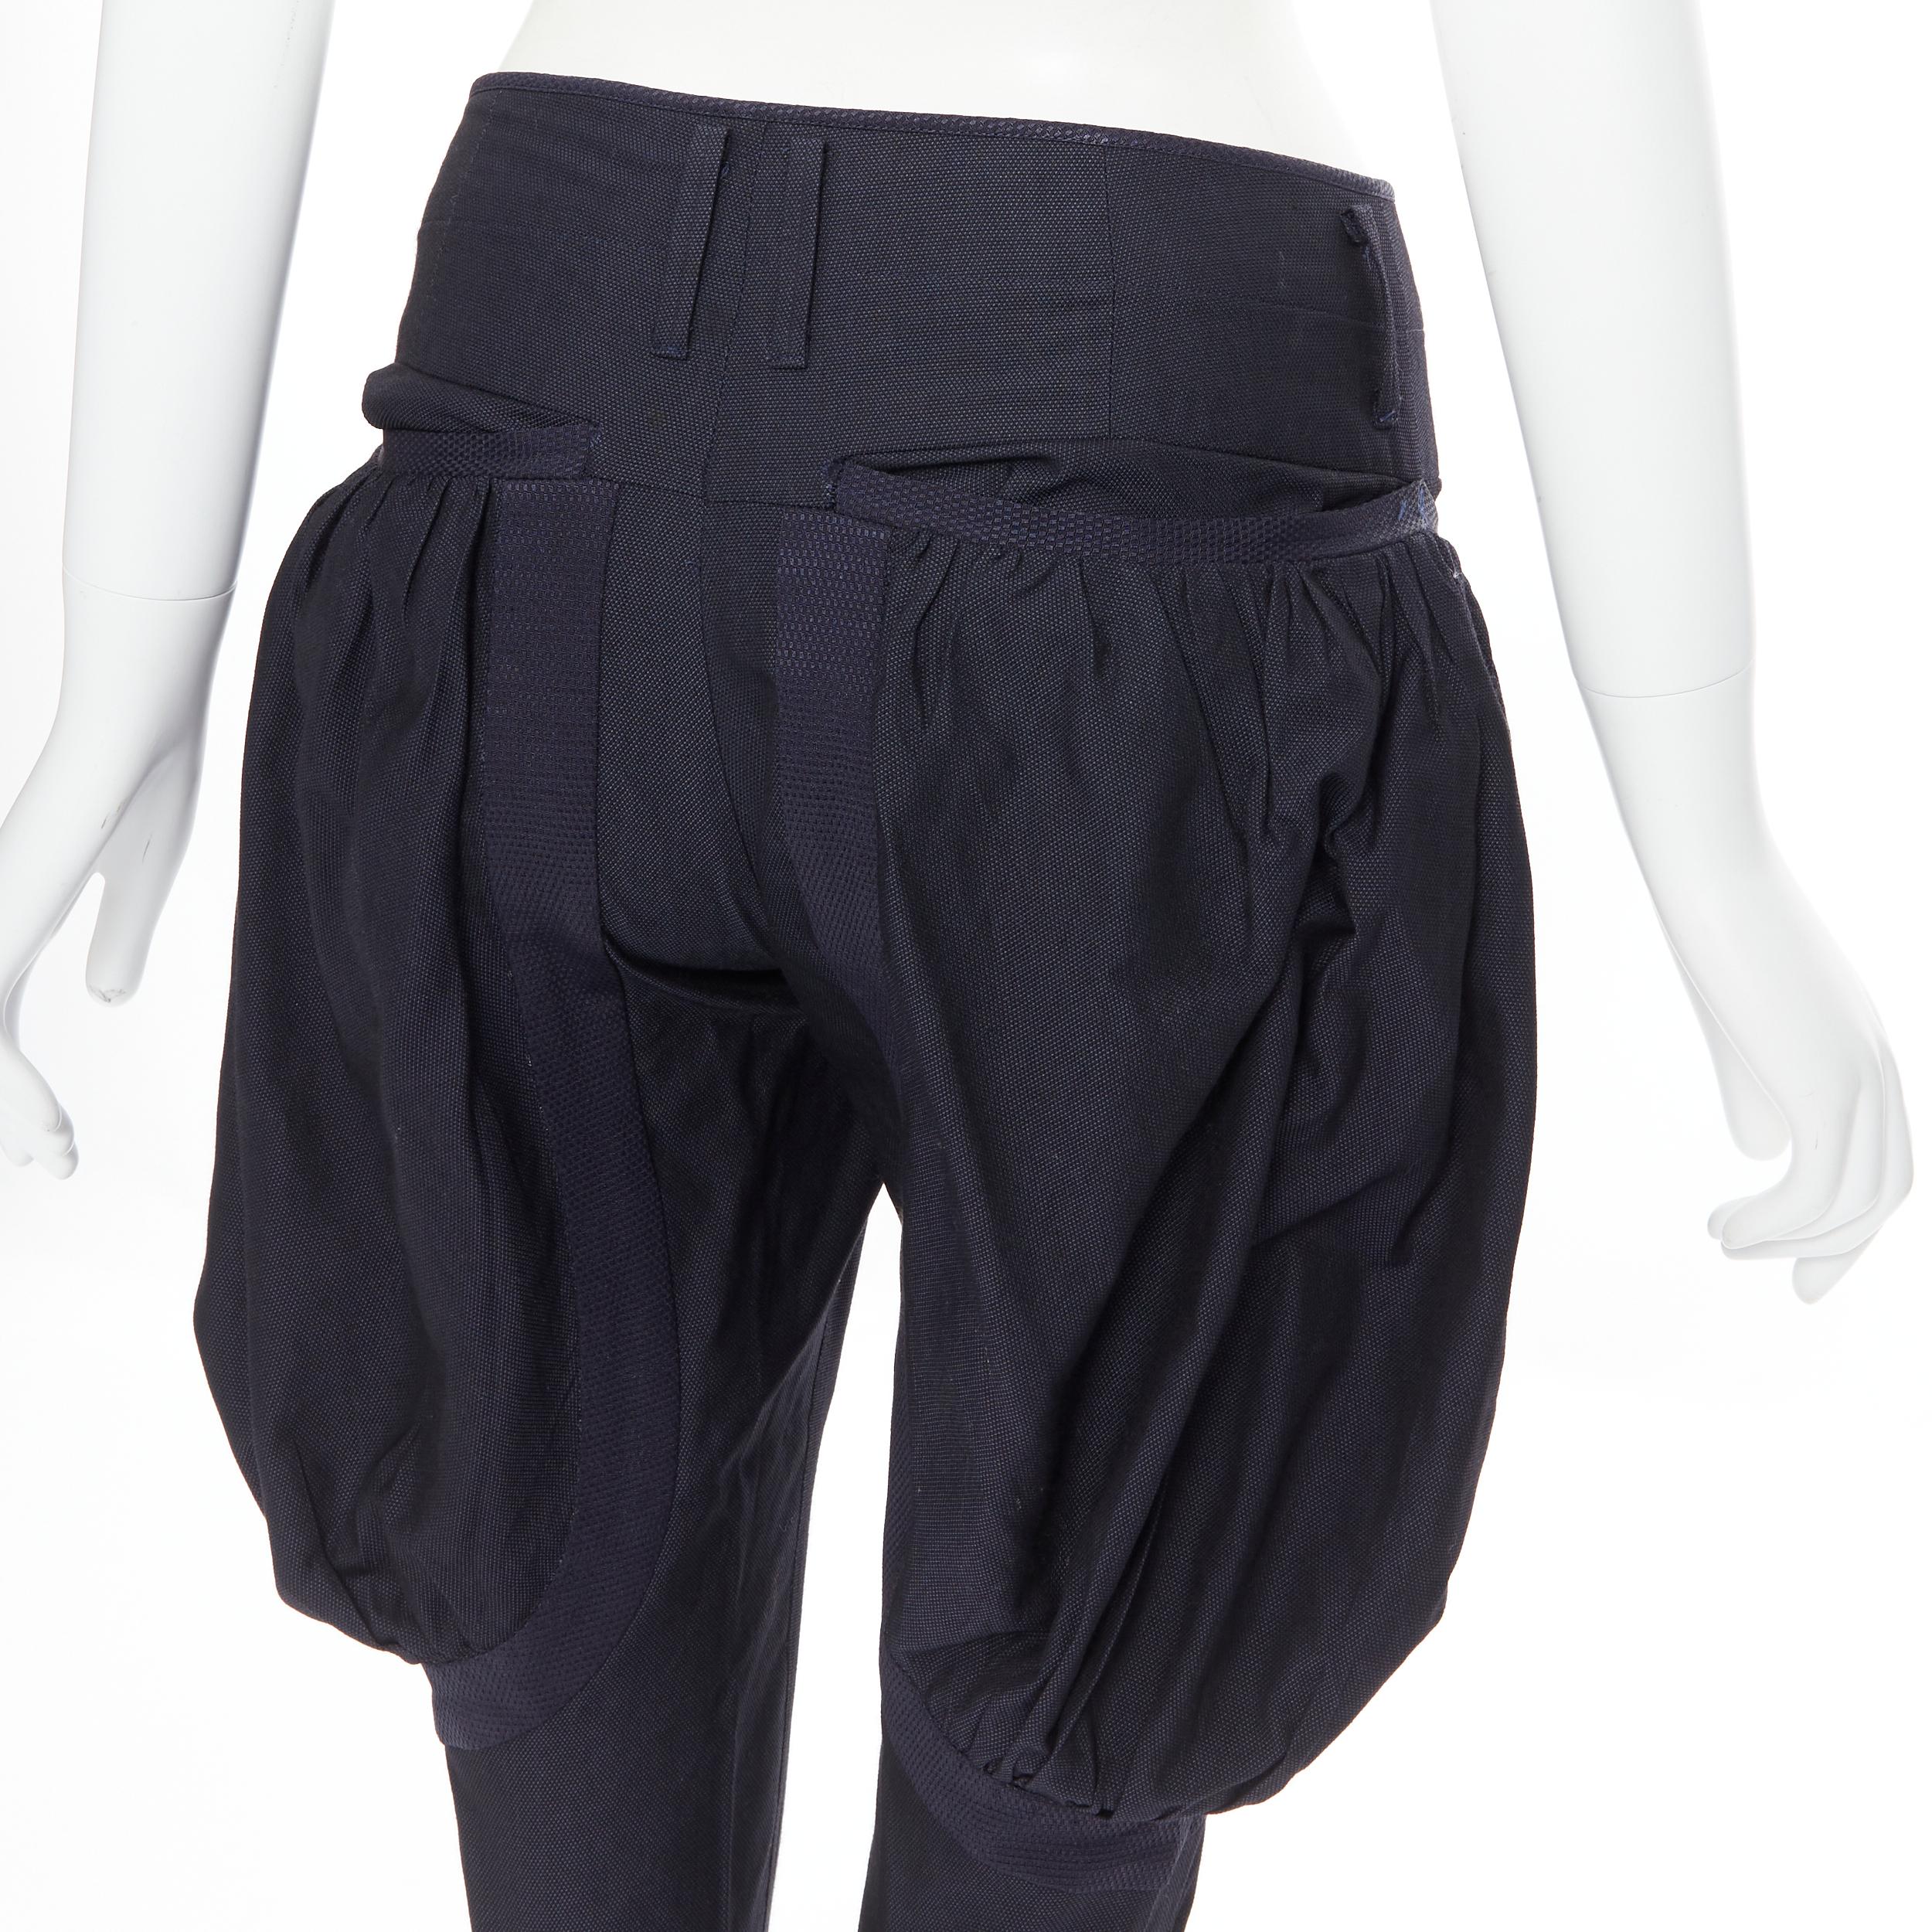 UNDERCOVER navy wool silk pleated exaggerated pockets jodphur riding pants M 
Reference: CAWG/A00206 
Brand: Undercover 
Material: Wool 
Color: Navy 
Pattern: Solid 
Closure: Zip 
Extra Detail: Wool silk blend. Navy blue. Zip fly. Pleated voluminous